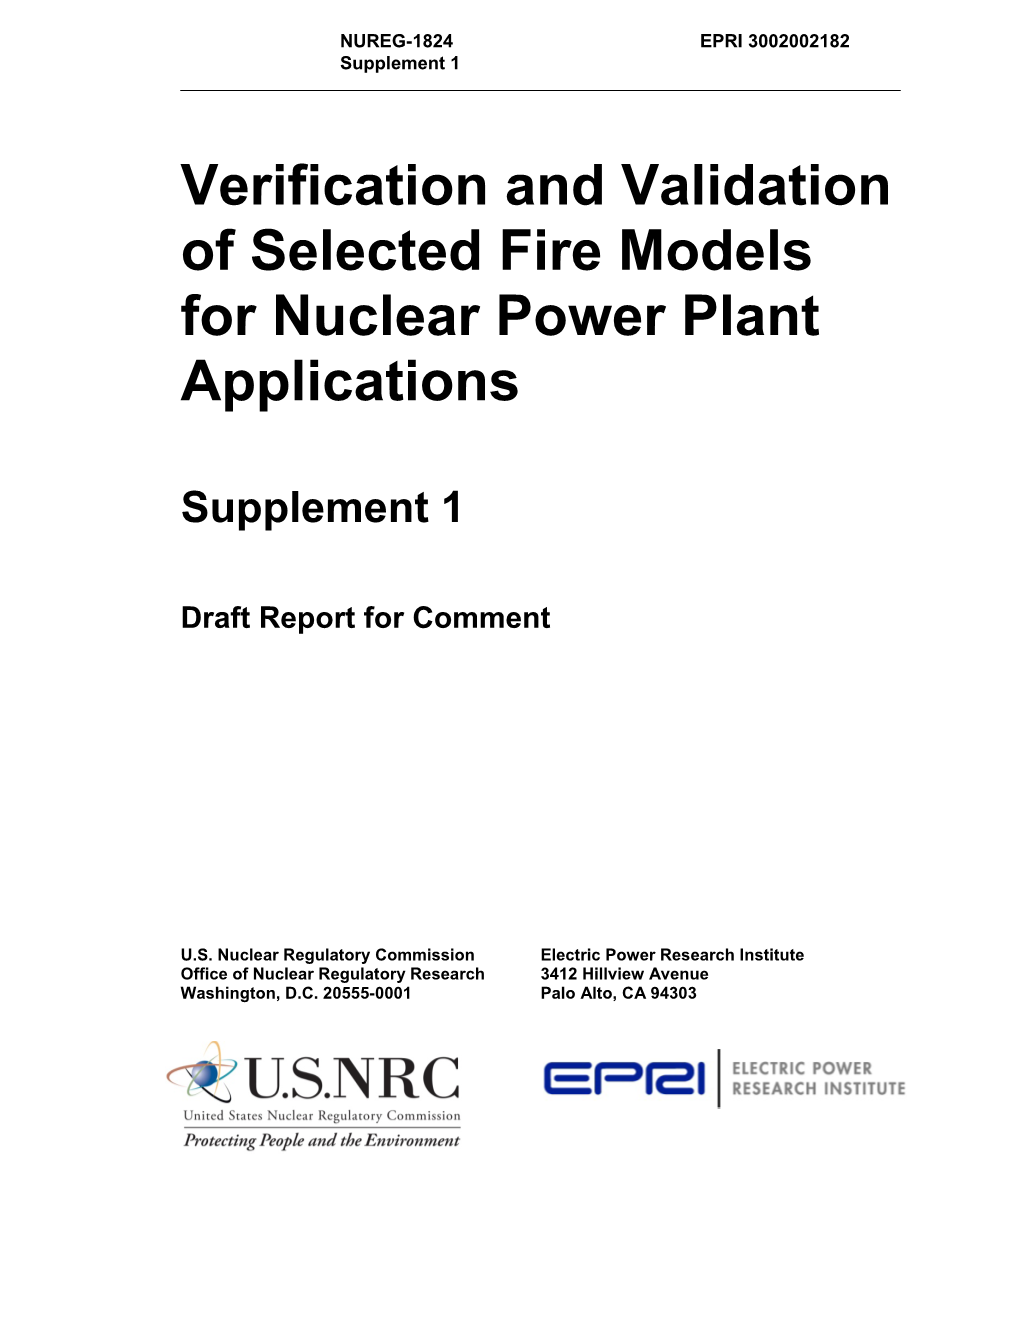 Verification and Validation of Selected Fire Models for Nuclear Power Plant Applications